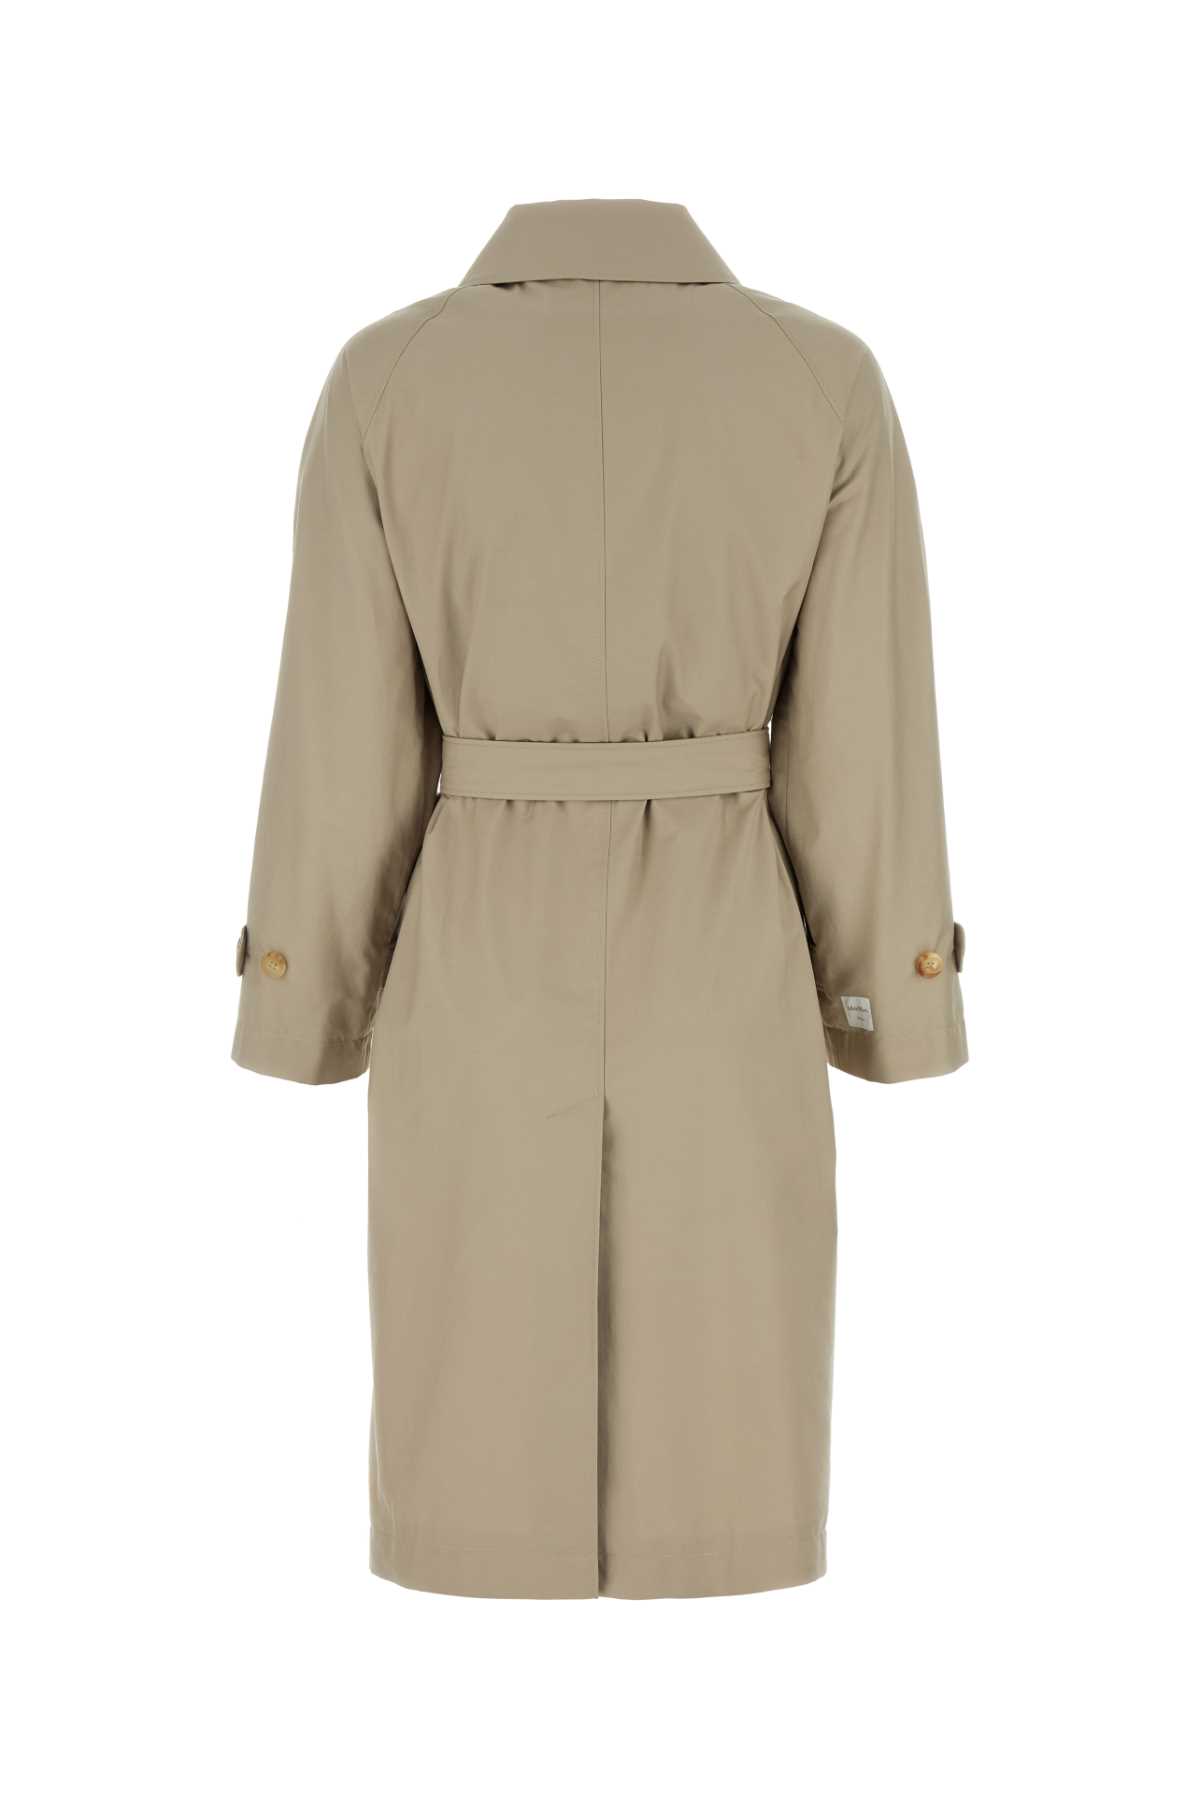 Max Mara The Cube Sand Twill Ftrench Trench Coat In Beige